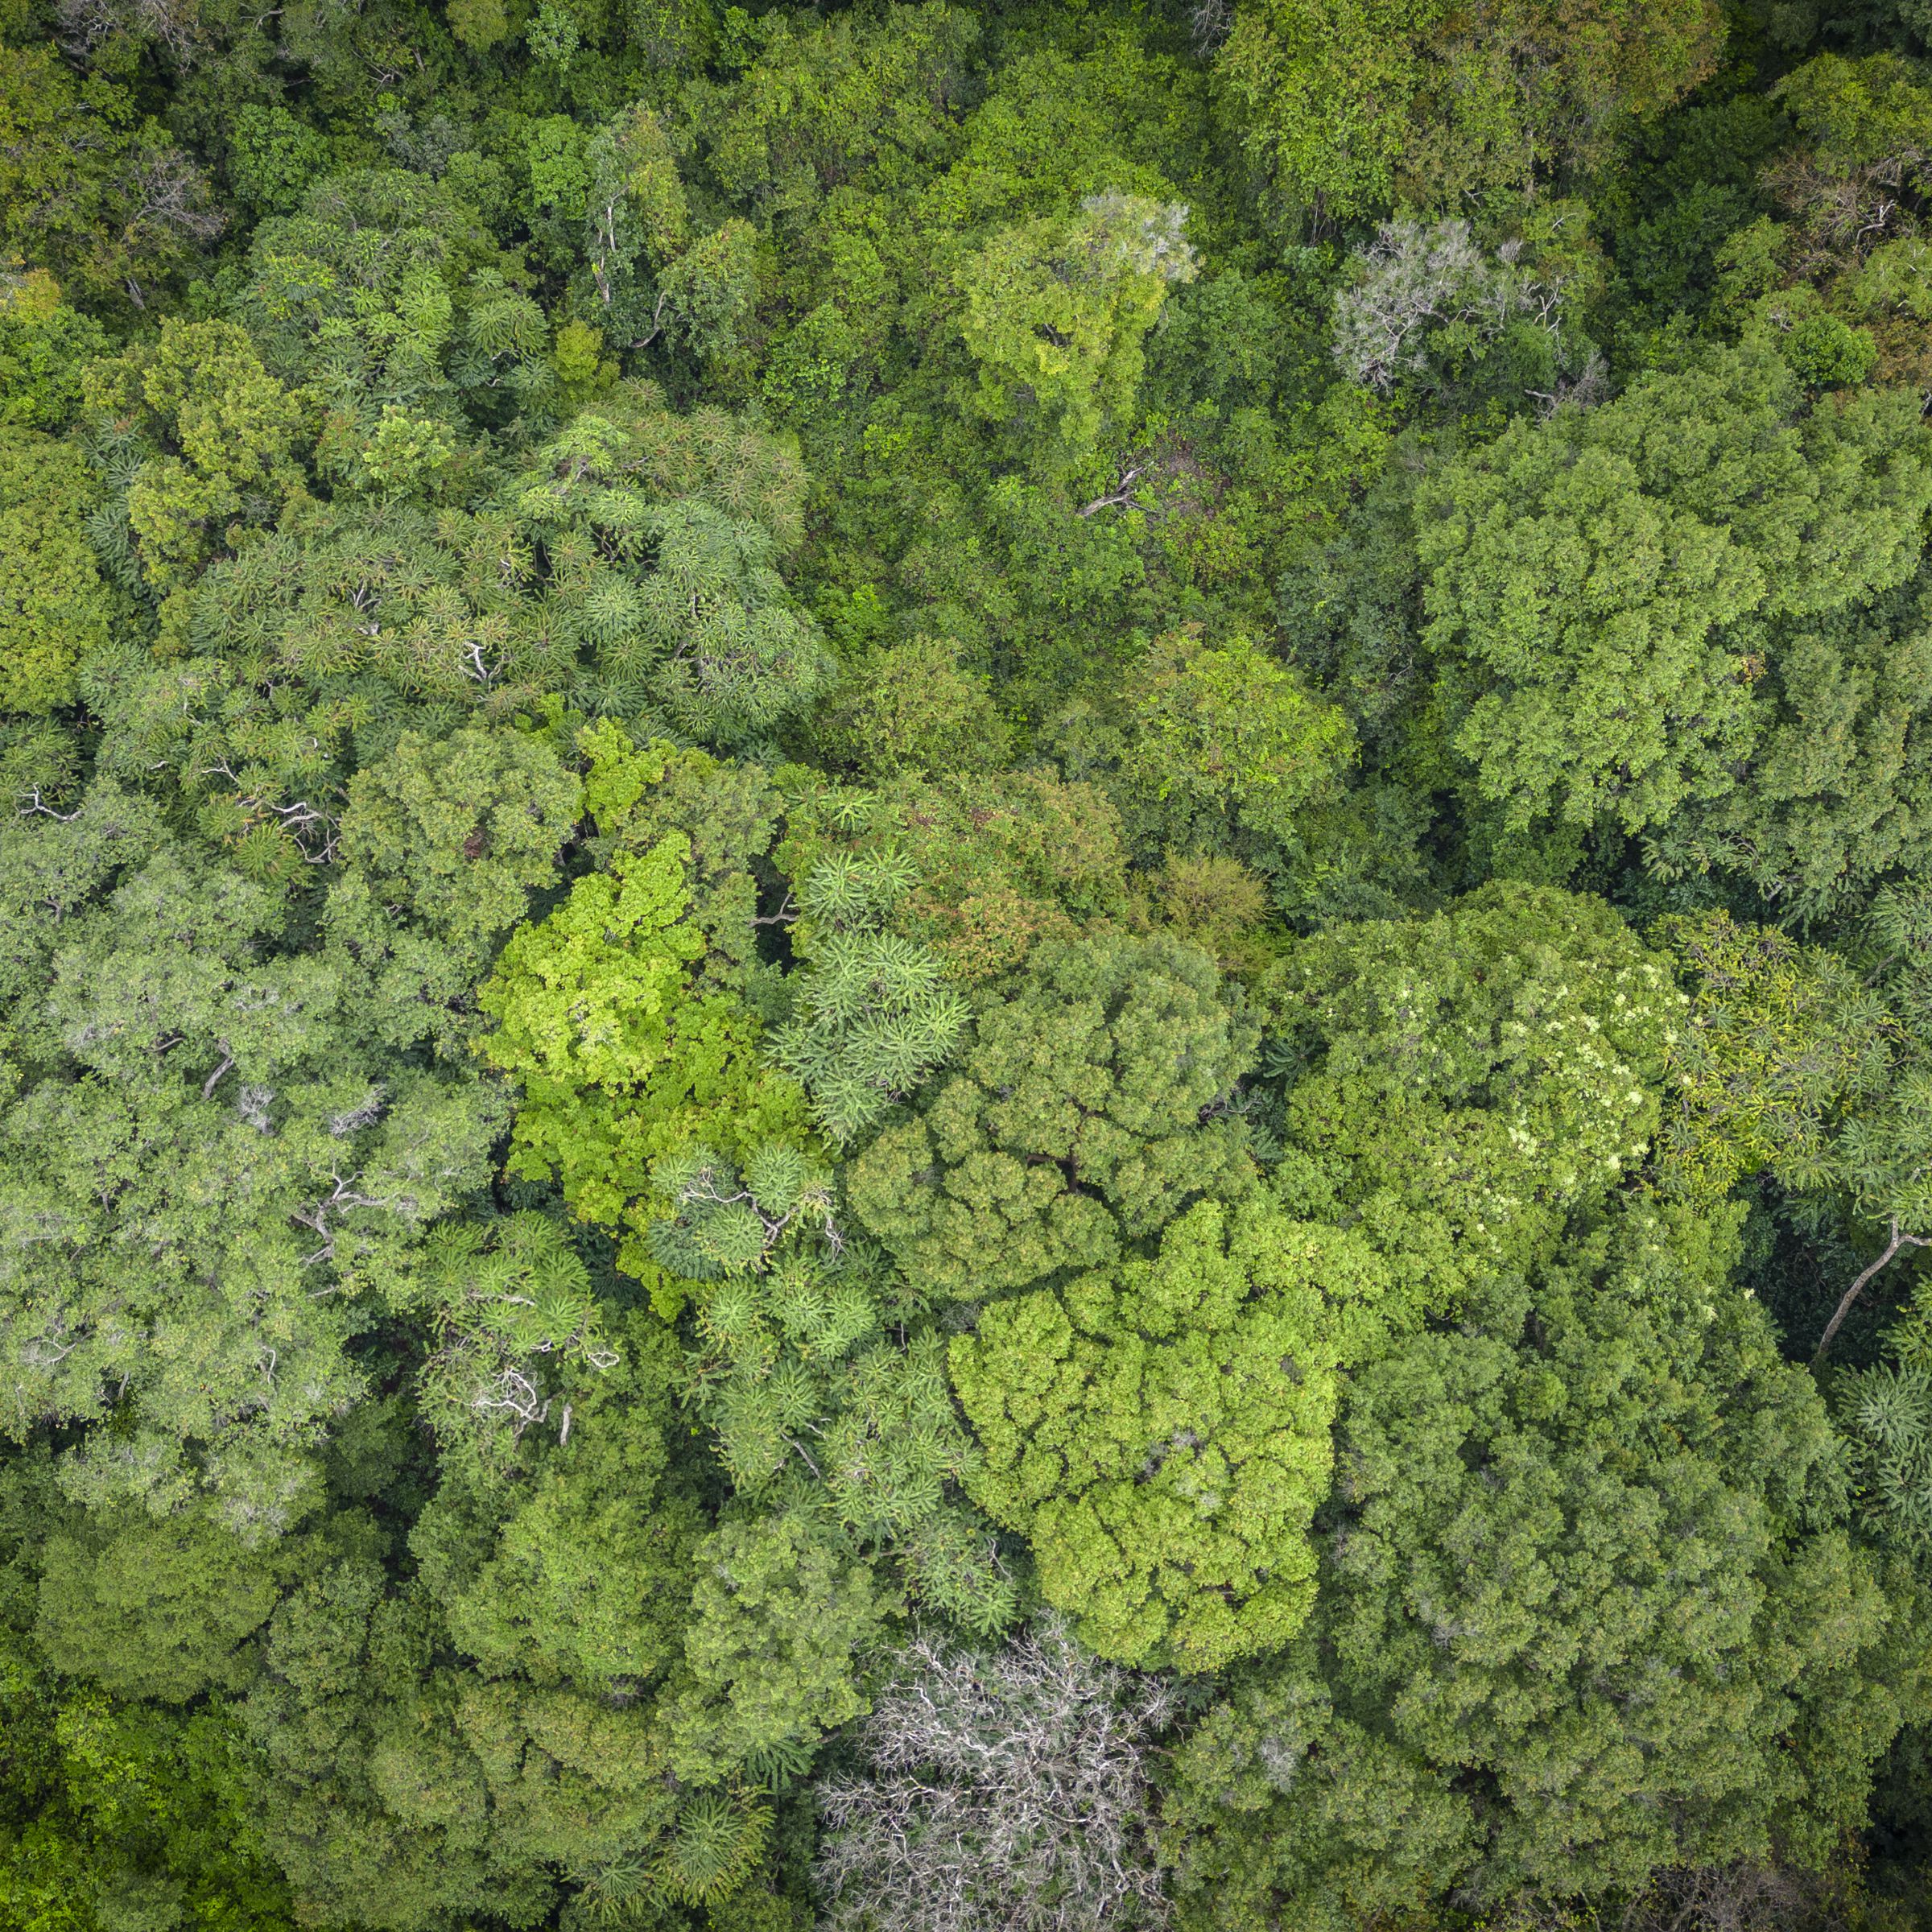 An aerial view of densely-packed green tree tops.